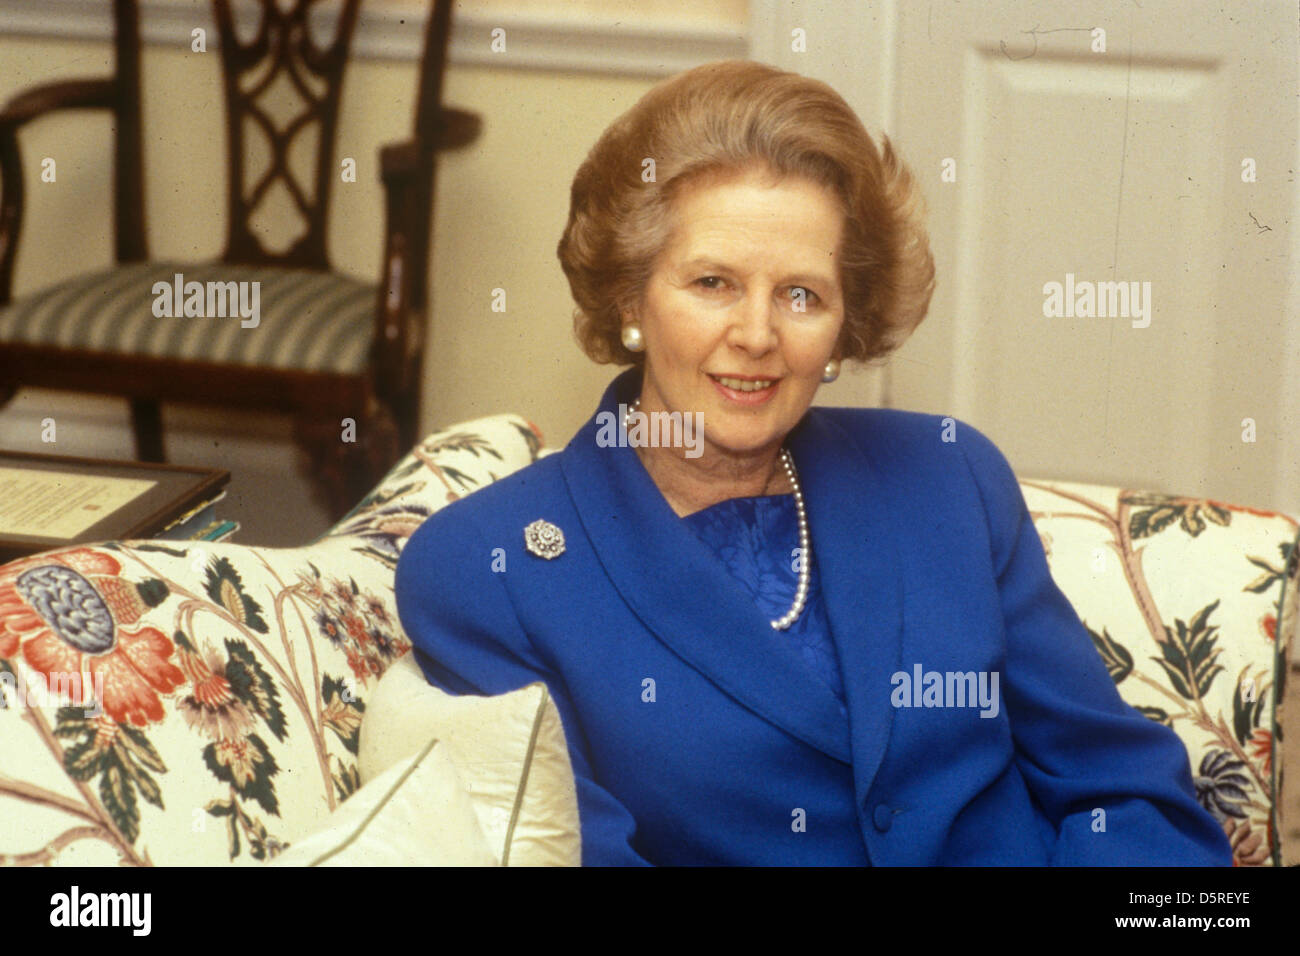 Margaret Thatcher died today 8th April 2013. Seen here in 1983 in her top floor, Downing Street London flat. Credit: Homer Sykes / Alamy Live News Stock Photo